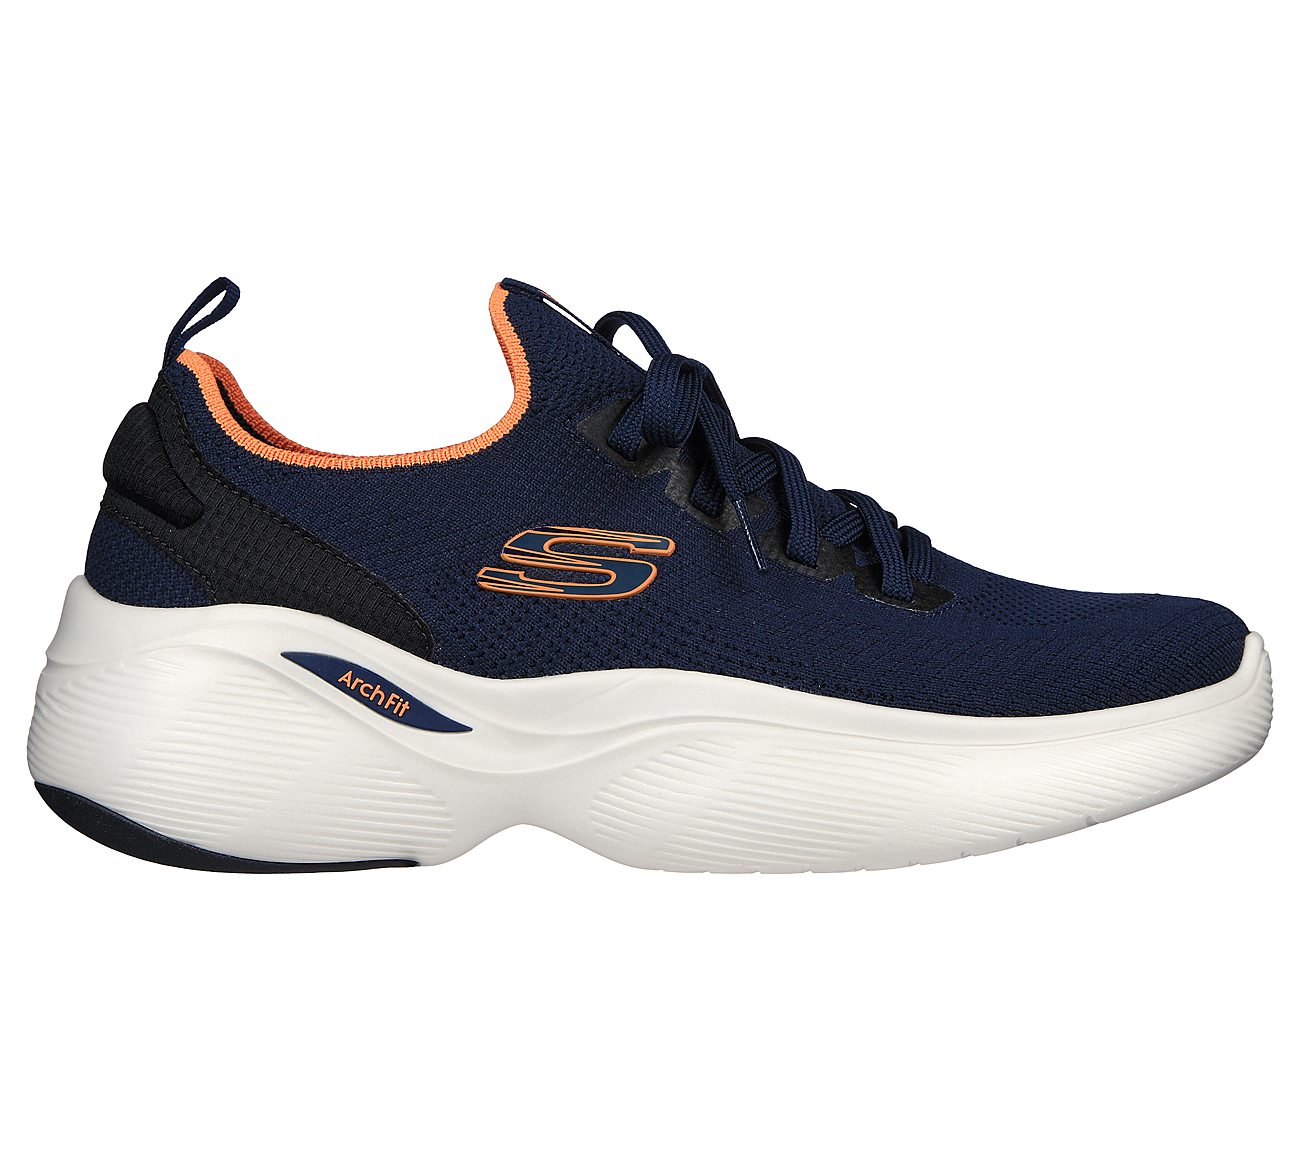 ARCH FIT INFINITY - STORMLIGH, NAVY/ORANGE Footwear Lateral View